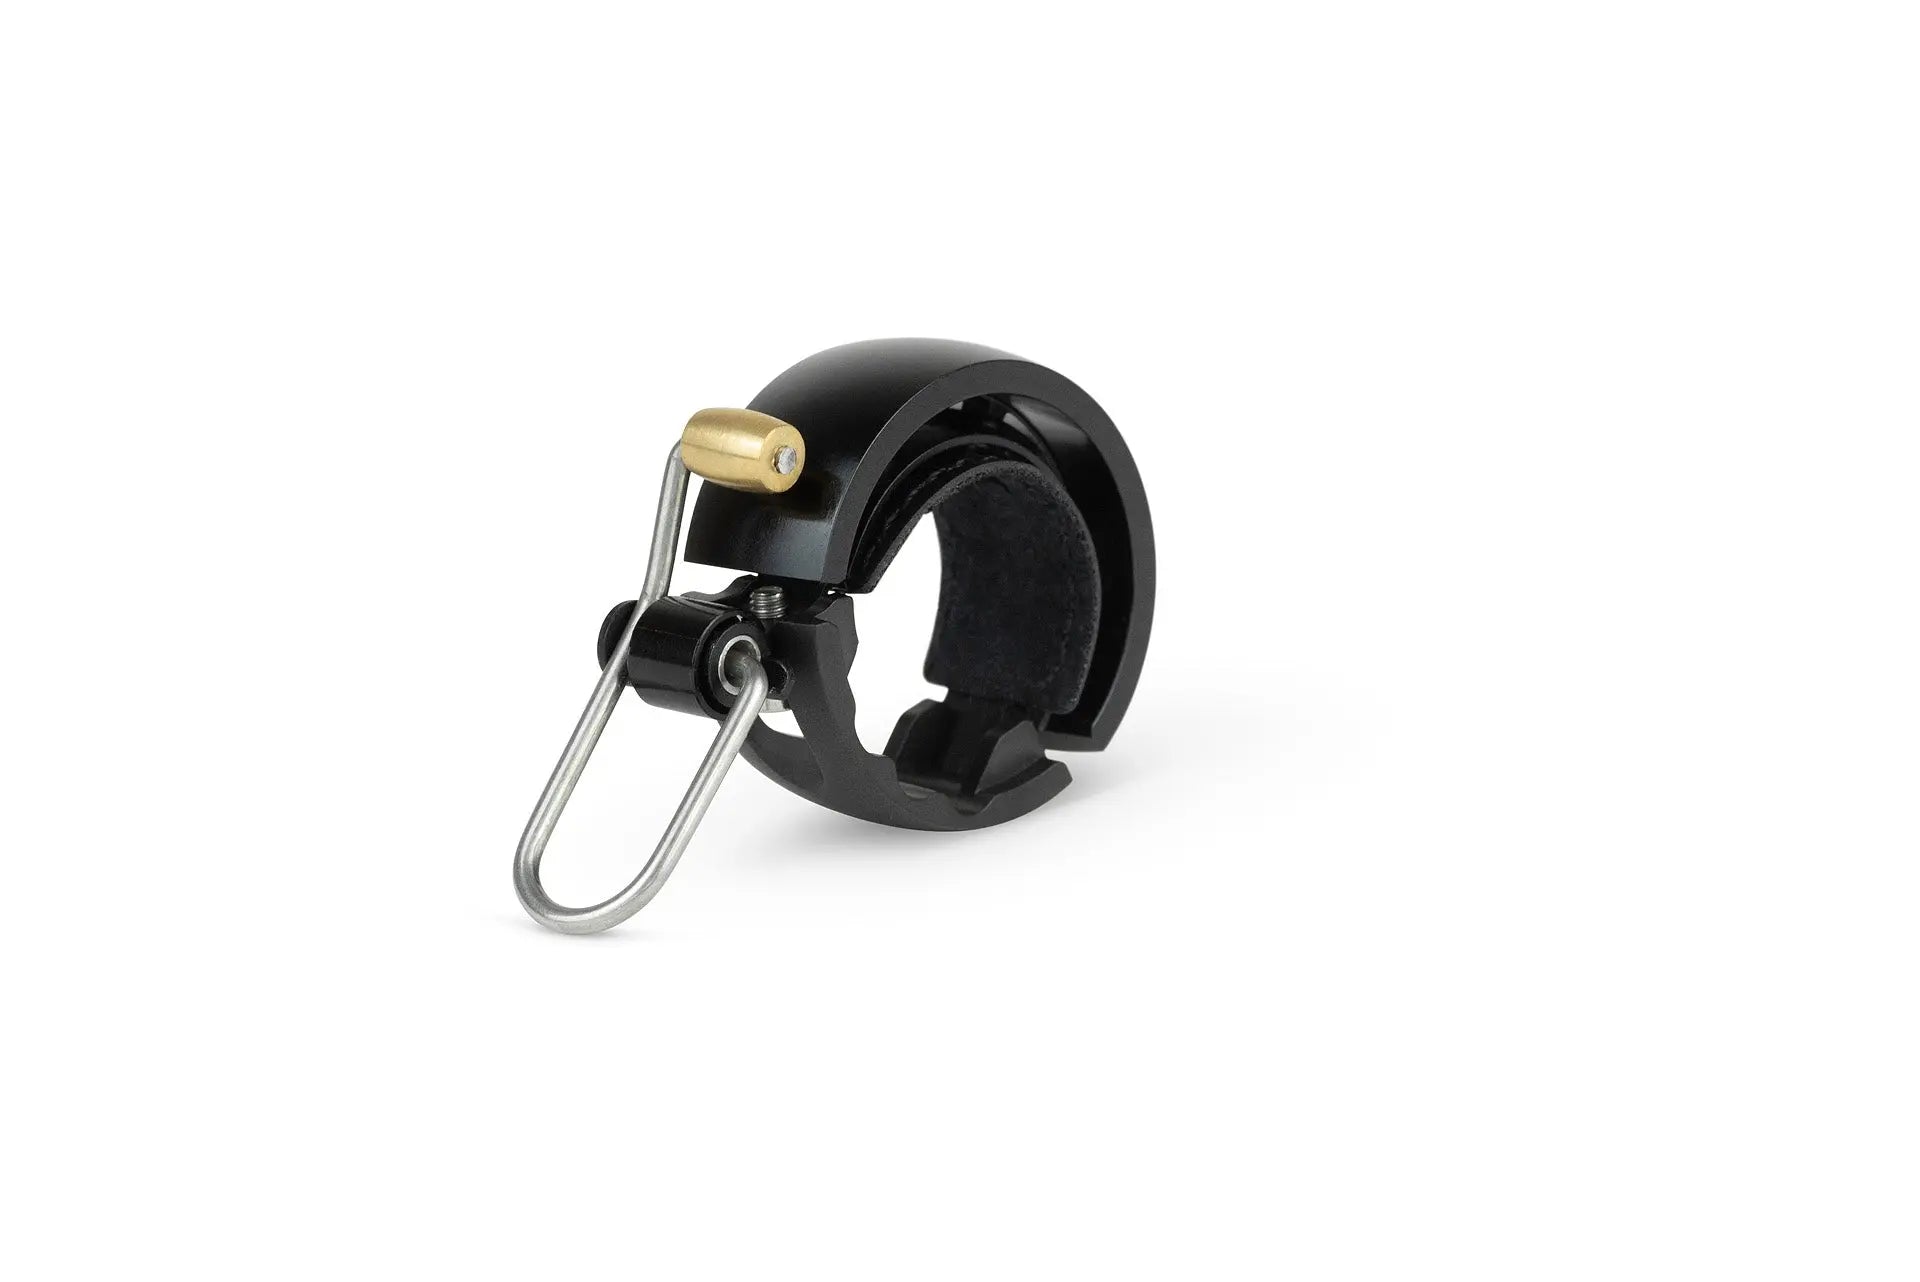 Knog Oi Deluxe Bell-Wabi Cycles